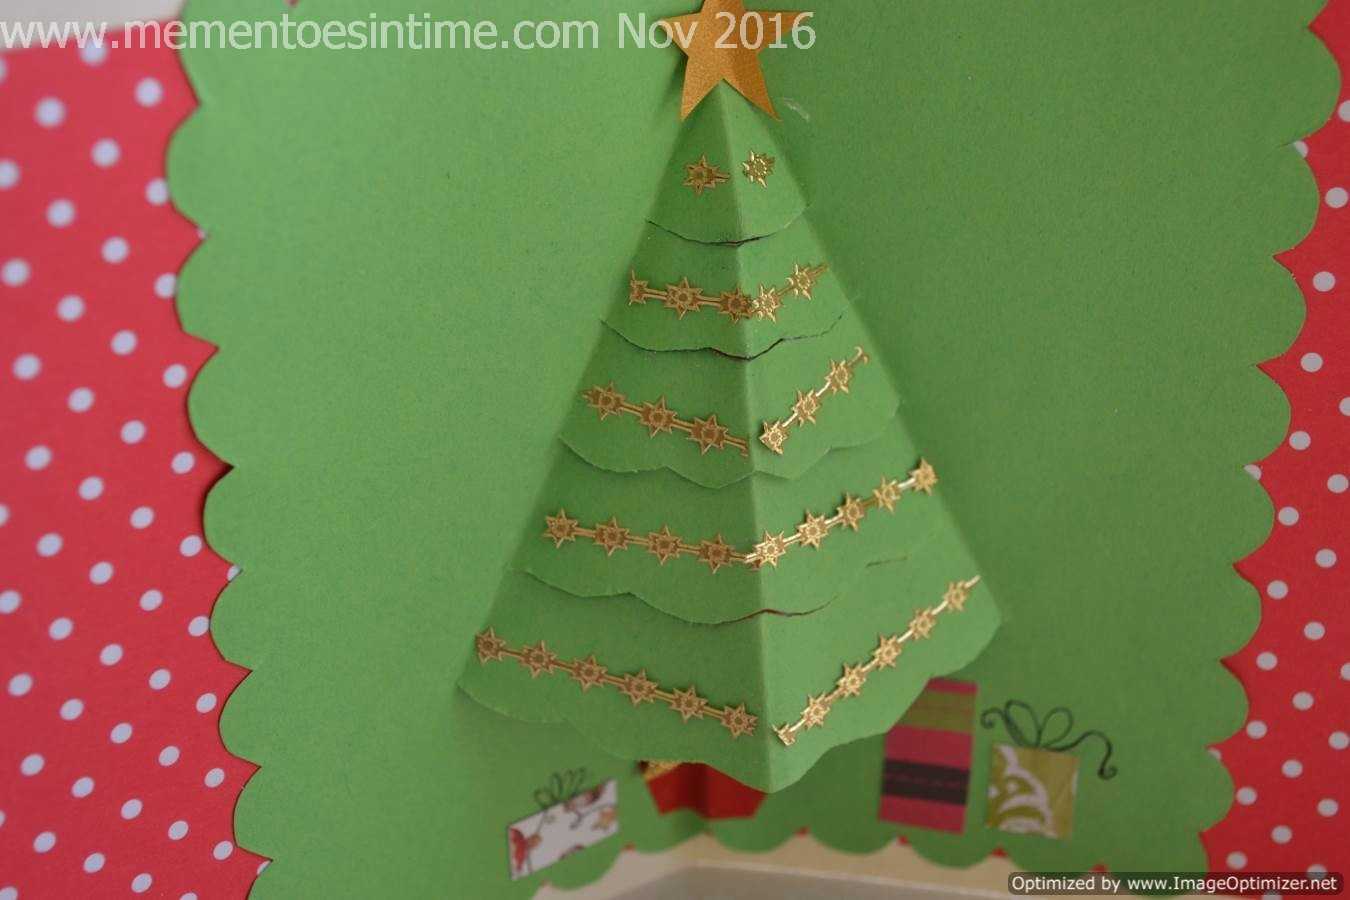 Mementoes In Time Blog – Mementoes In Time Pertaining To Pop Up Tree Card Template